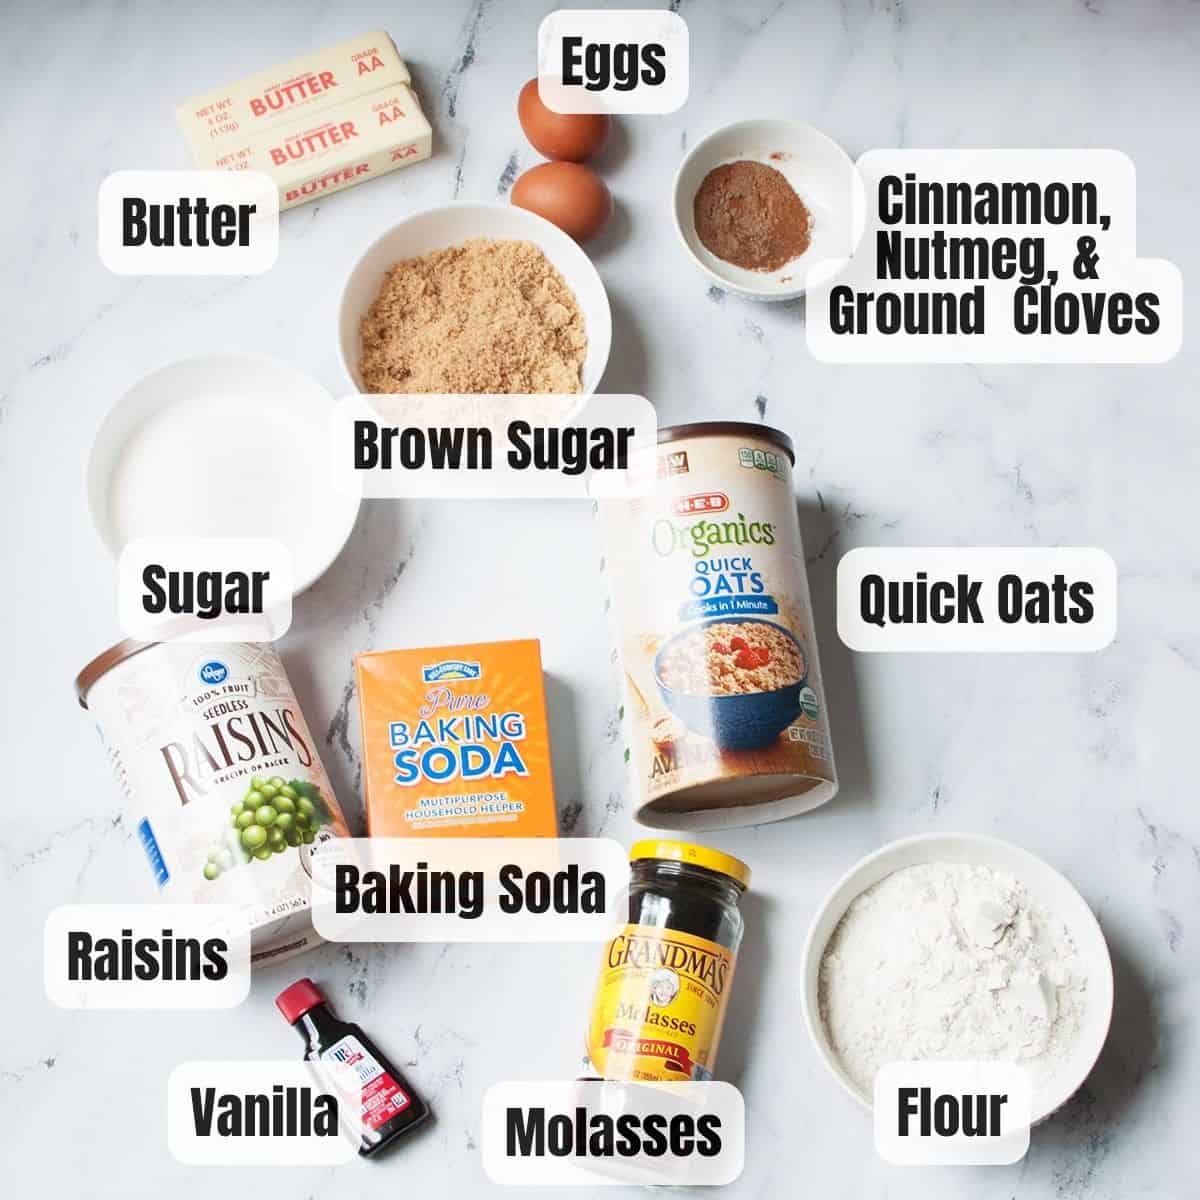 ingredients needed to make Amish oatmeal cookies